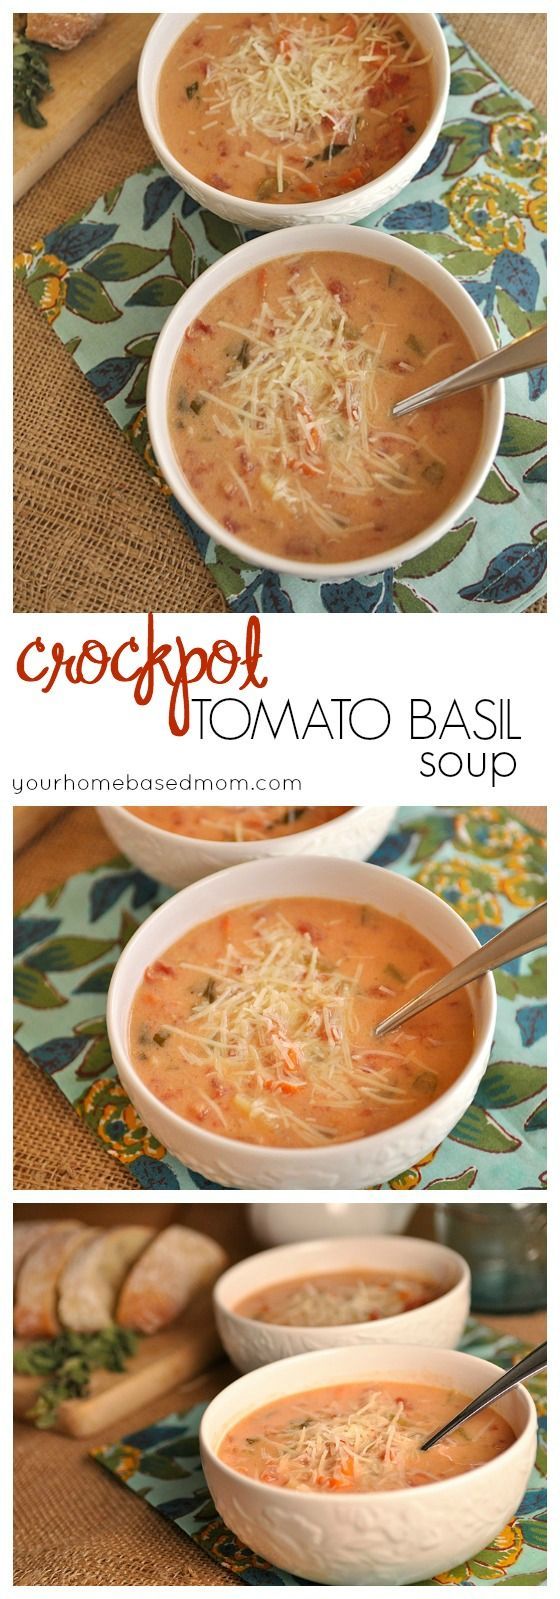 Crock Pot Tomato Basil Soup is delcious and easy to make – the perfect dinner solution